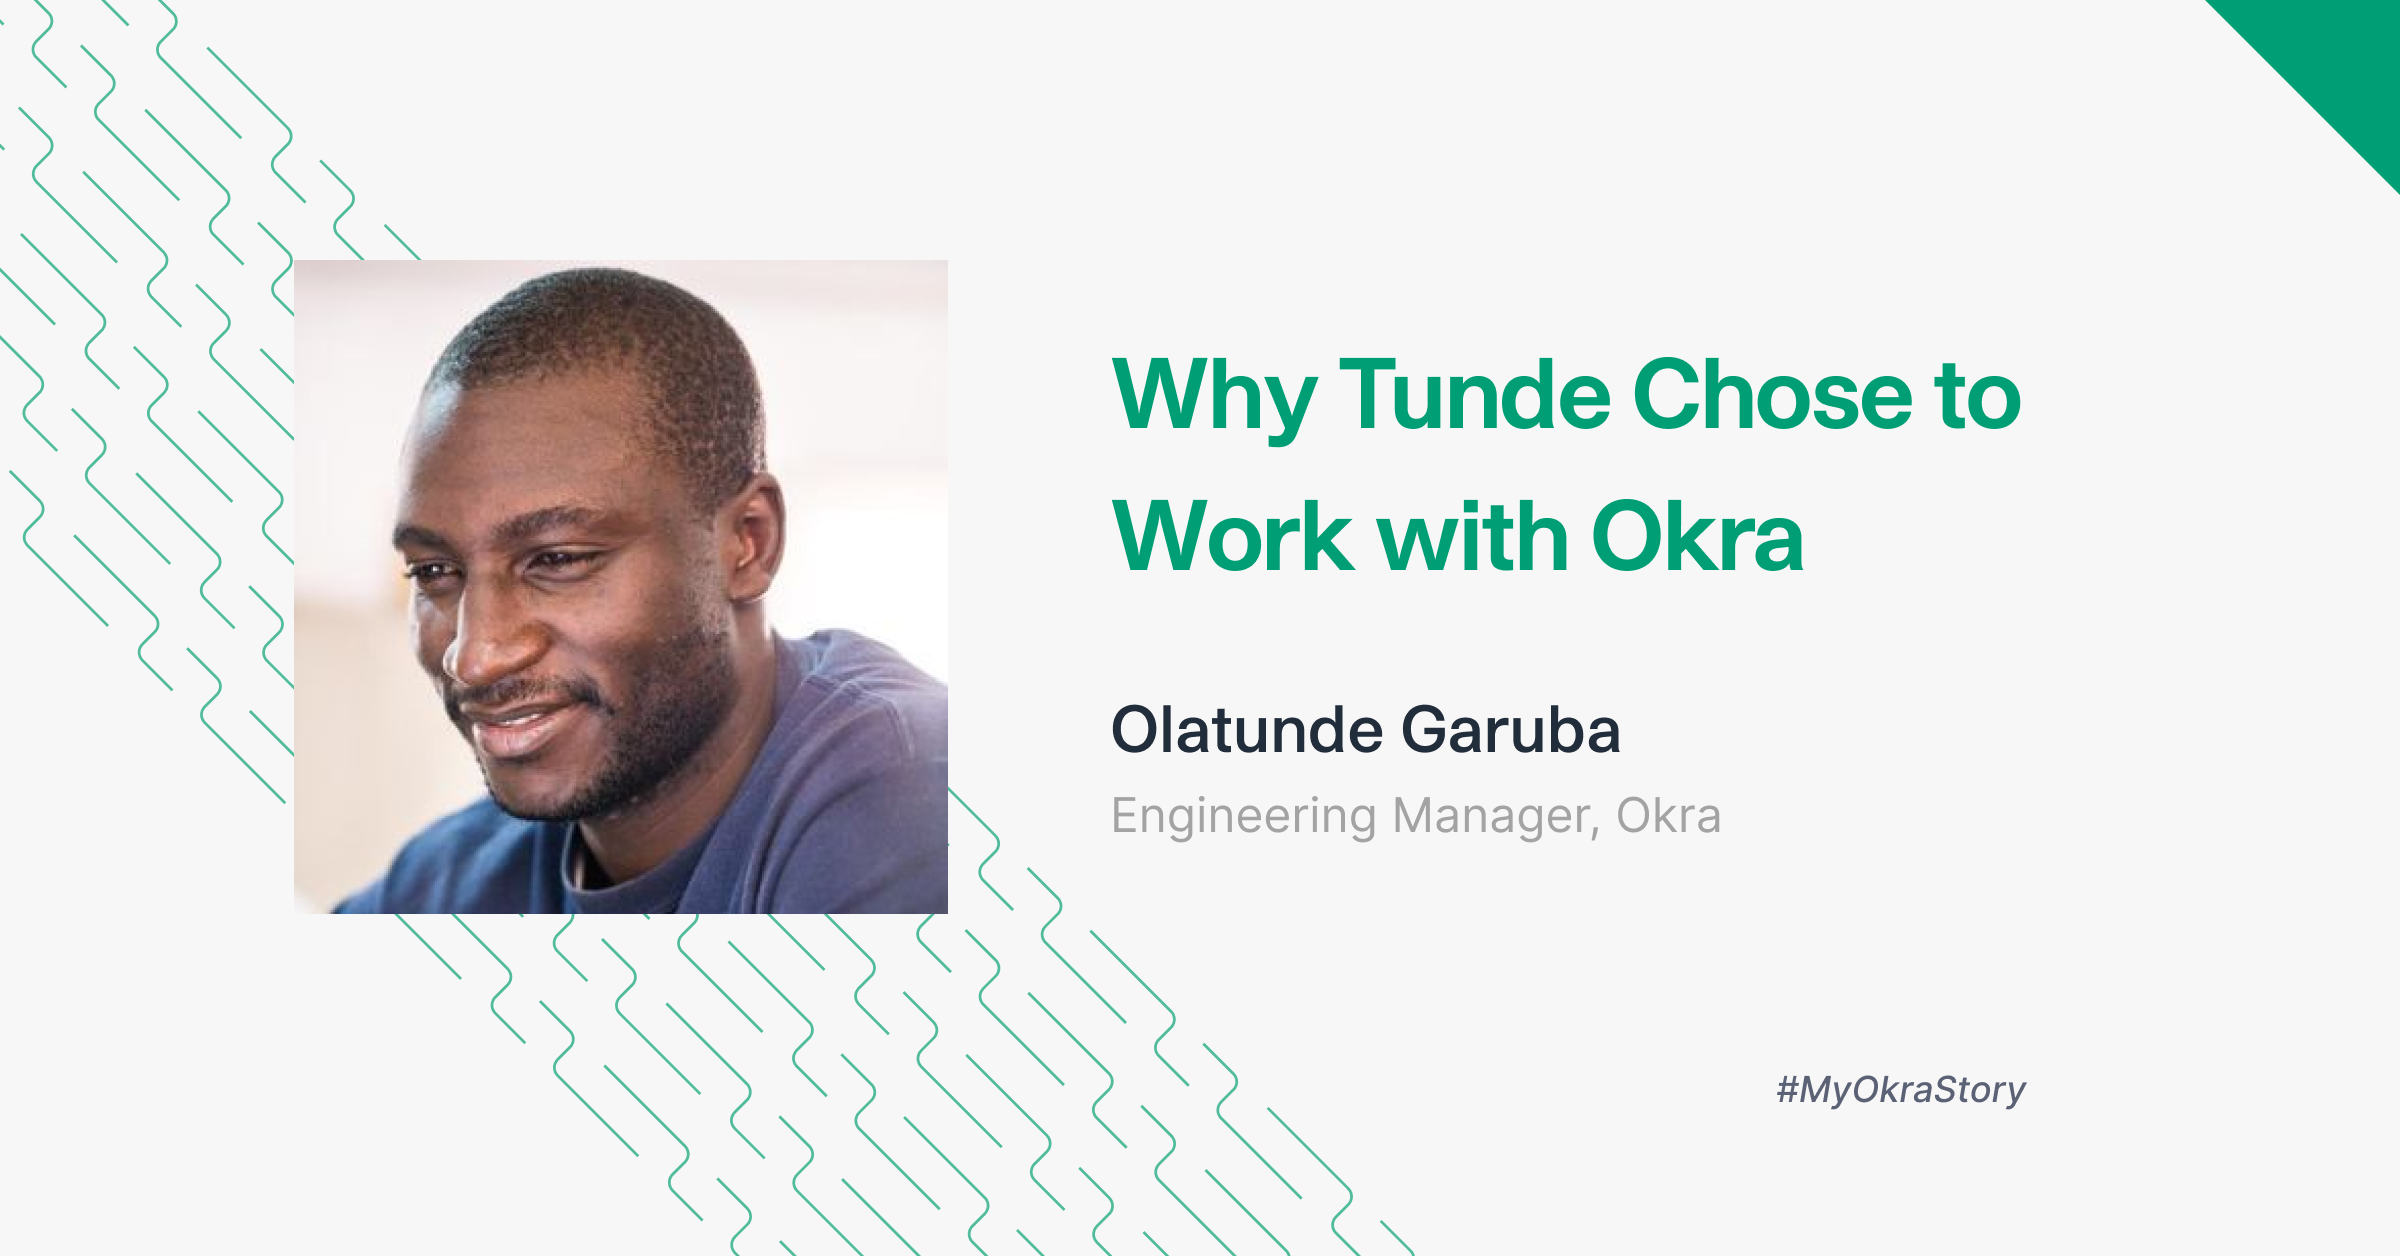 Why Tunde Chose to Work with Okra